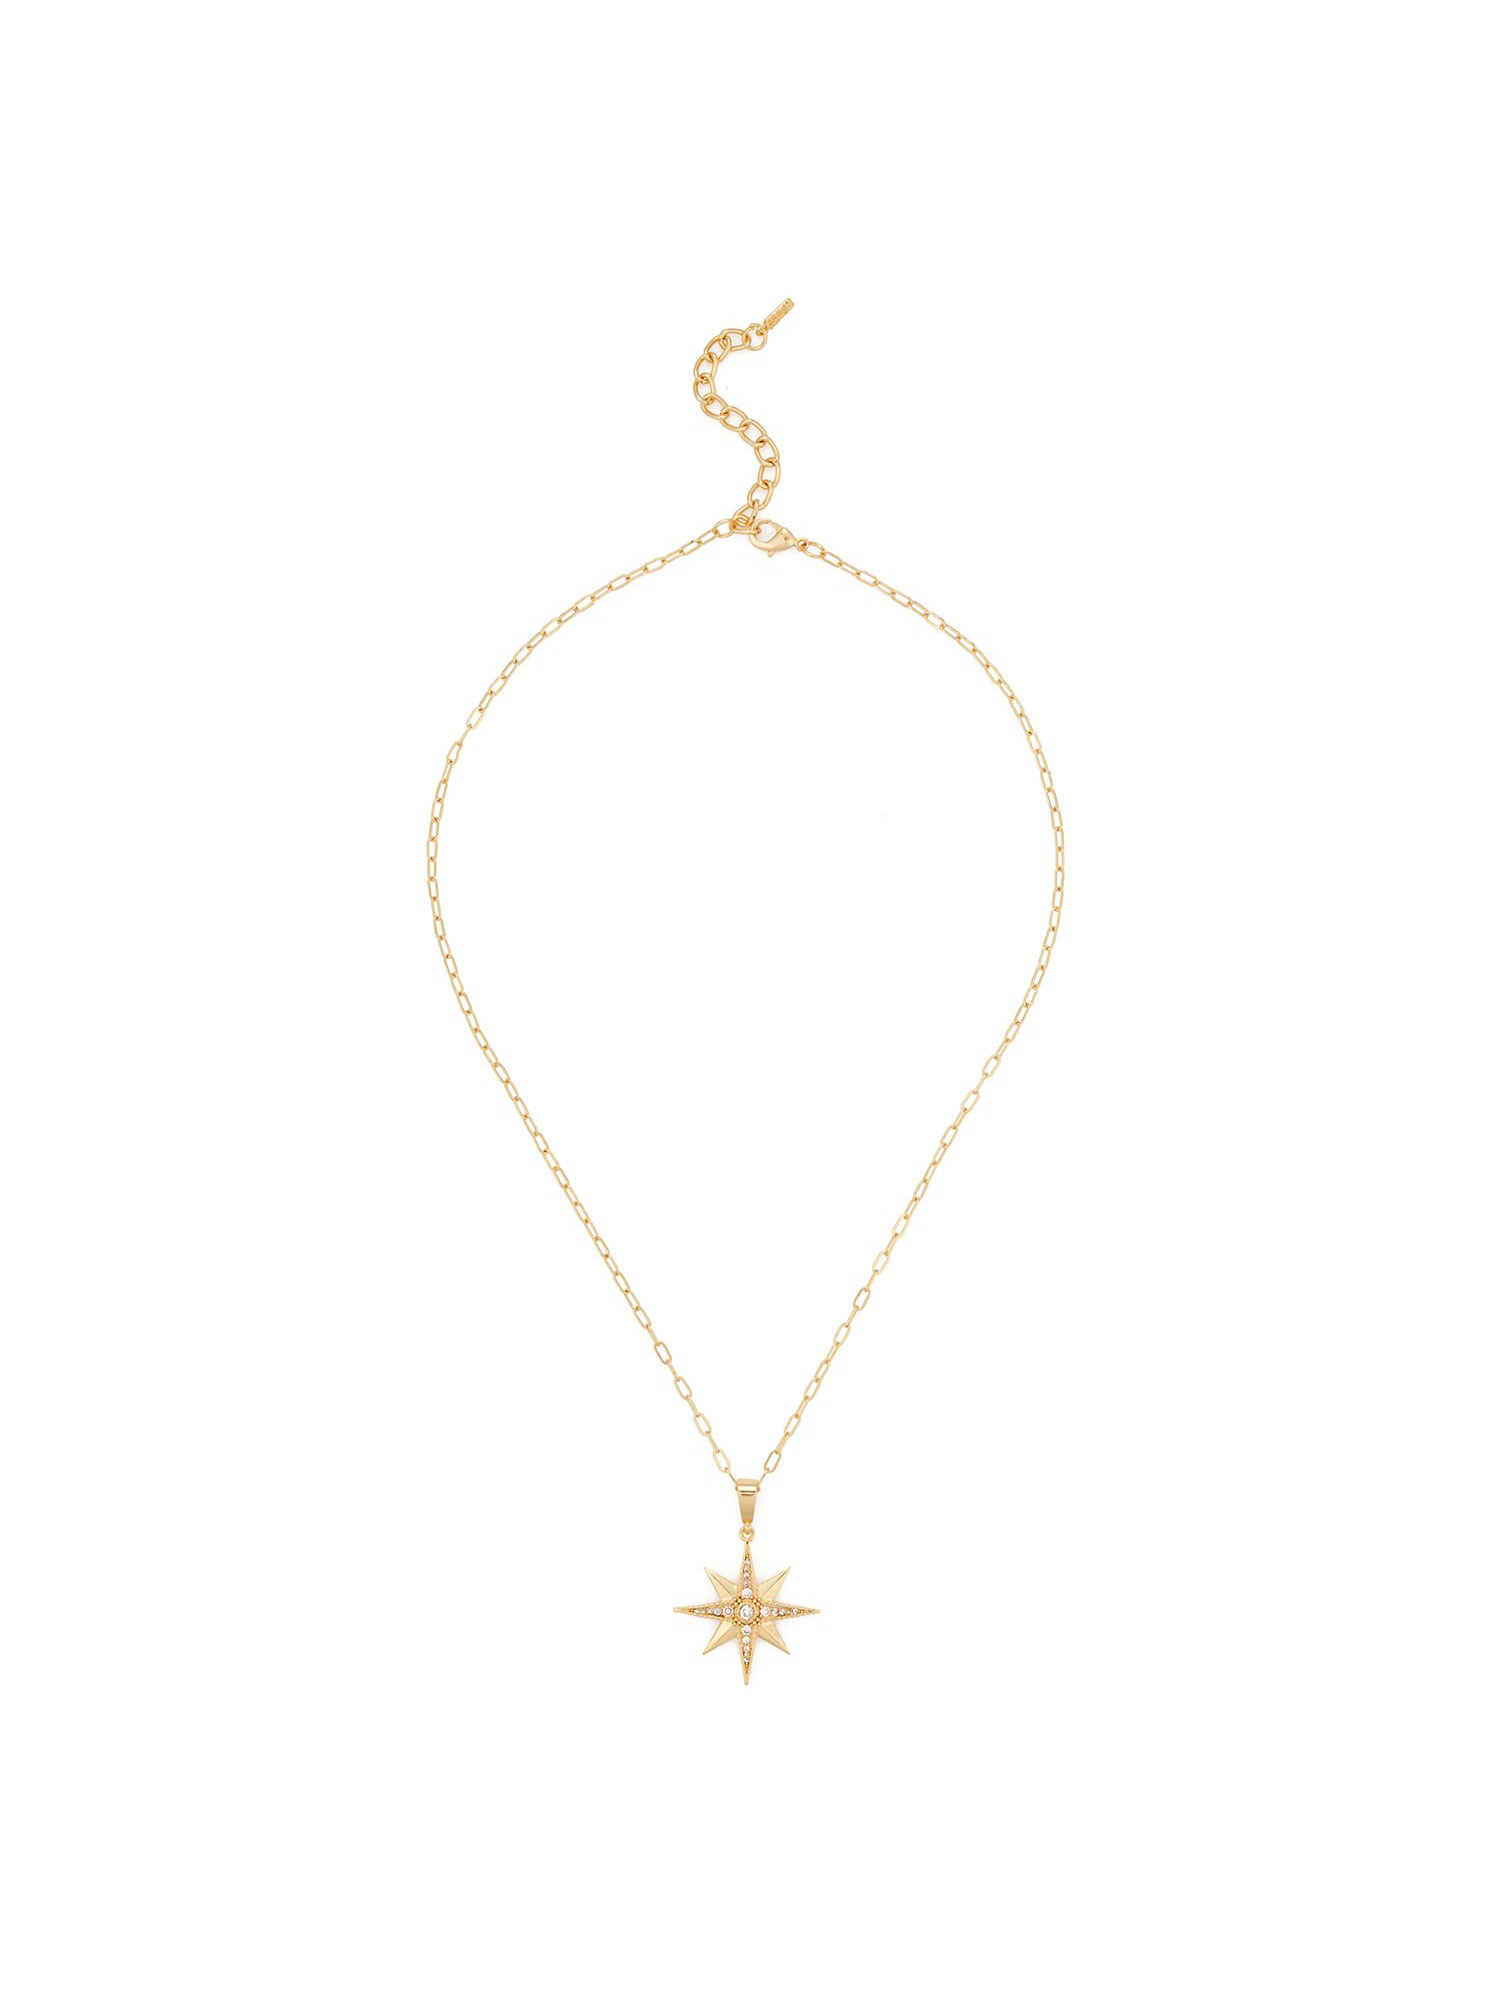 THE NORTH STAR NECKLACE GOLD